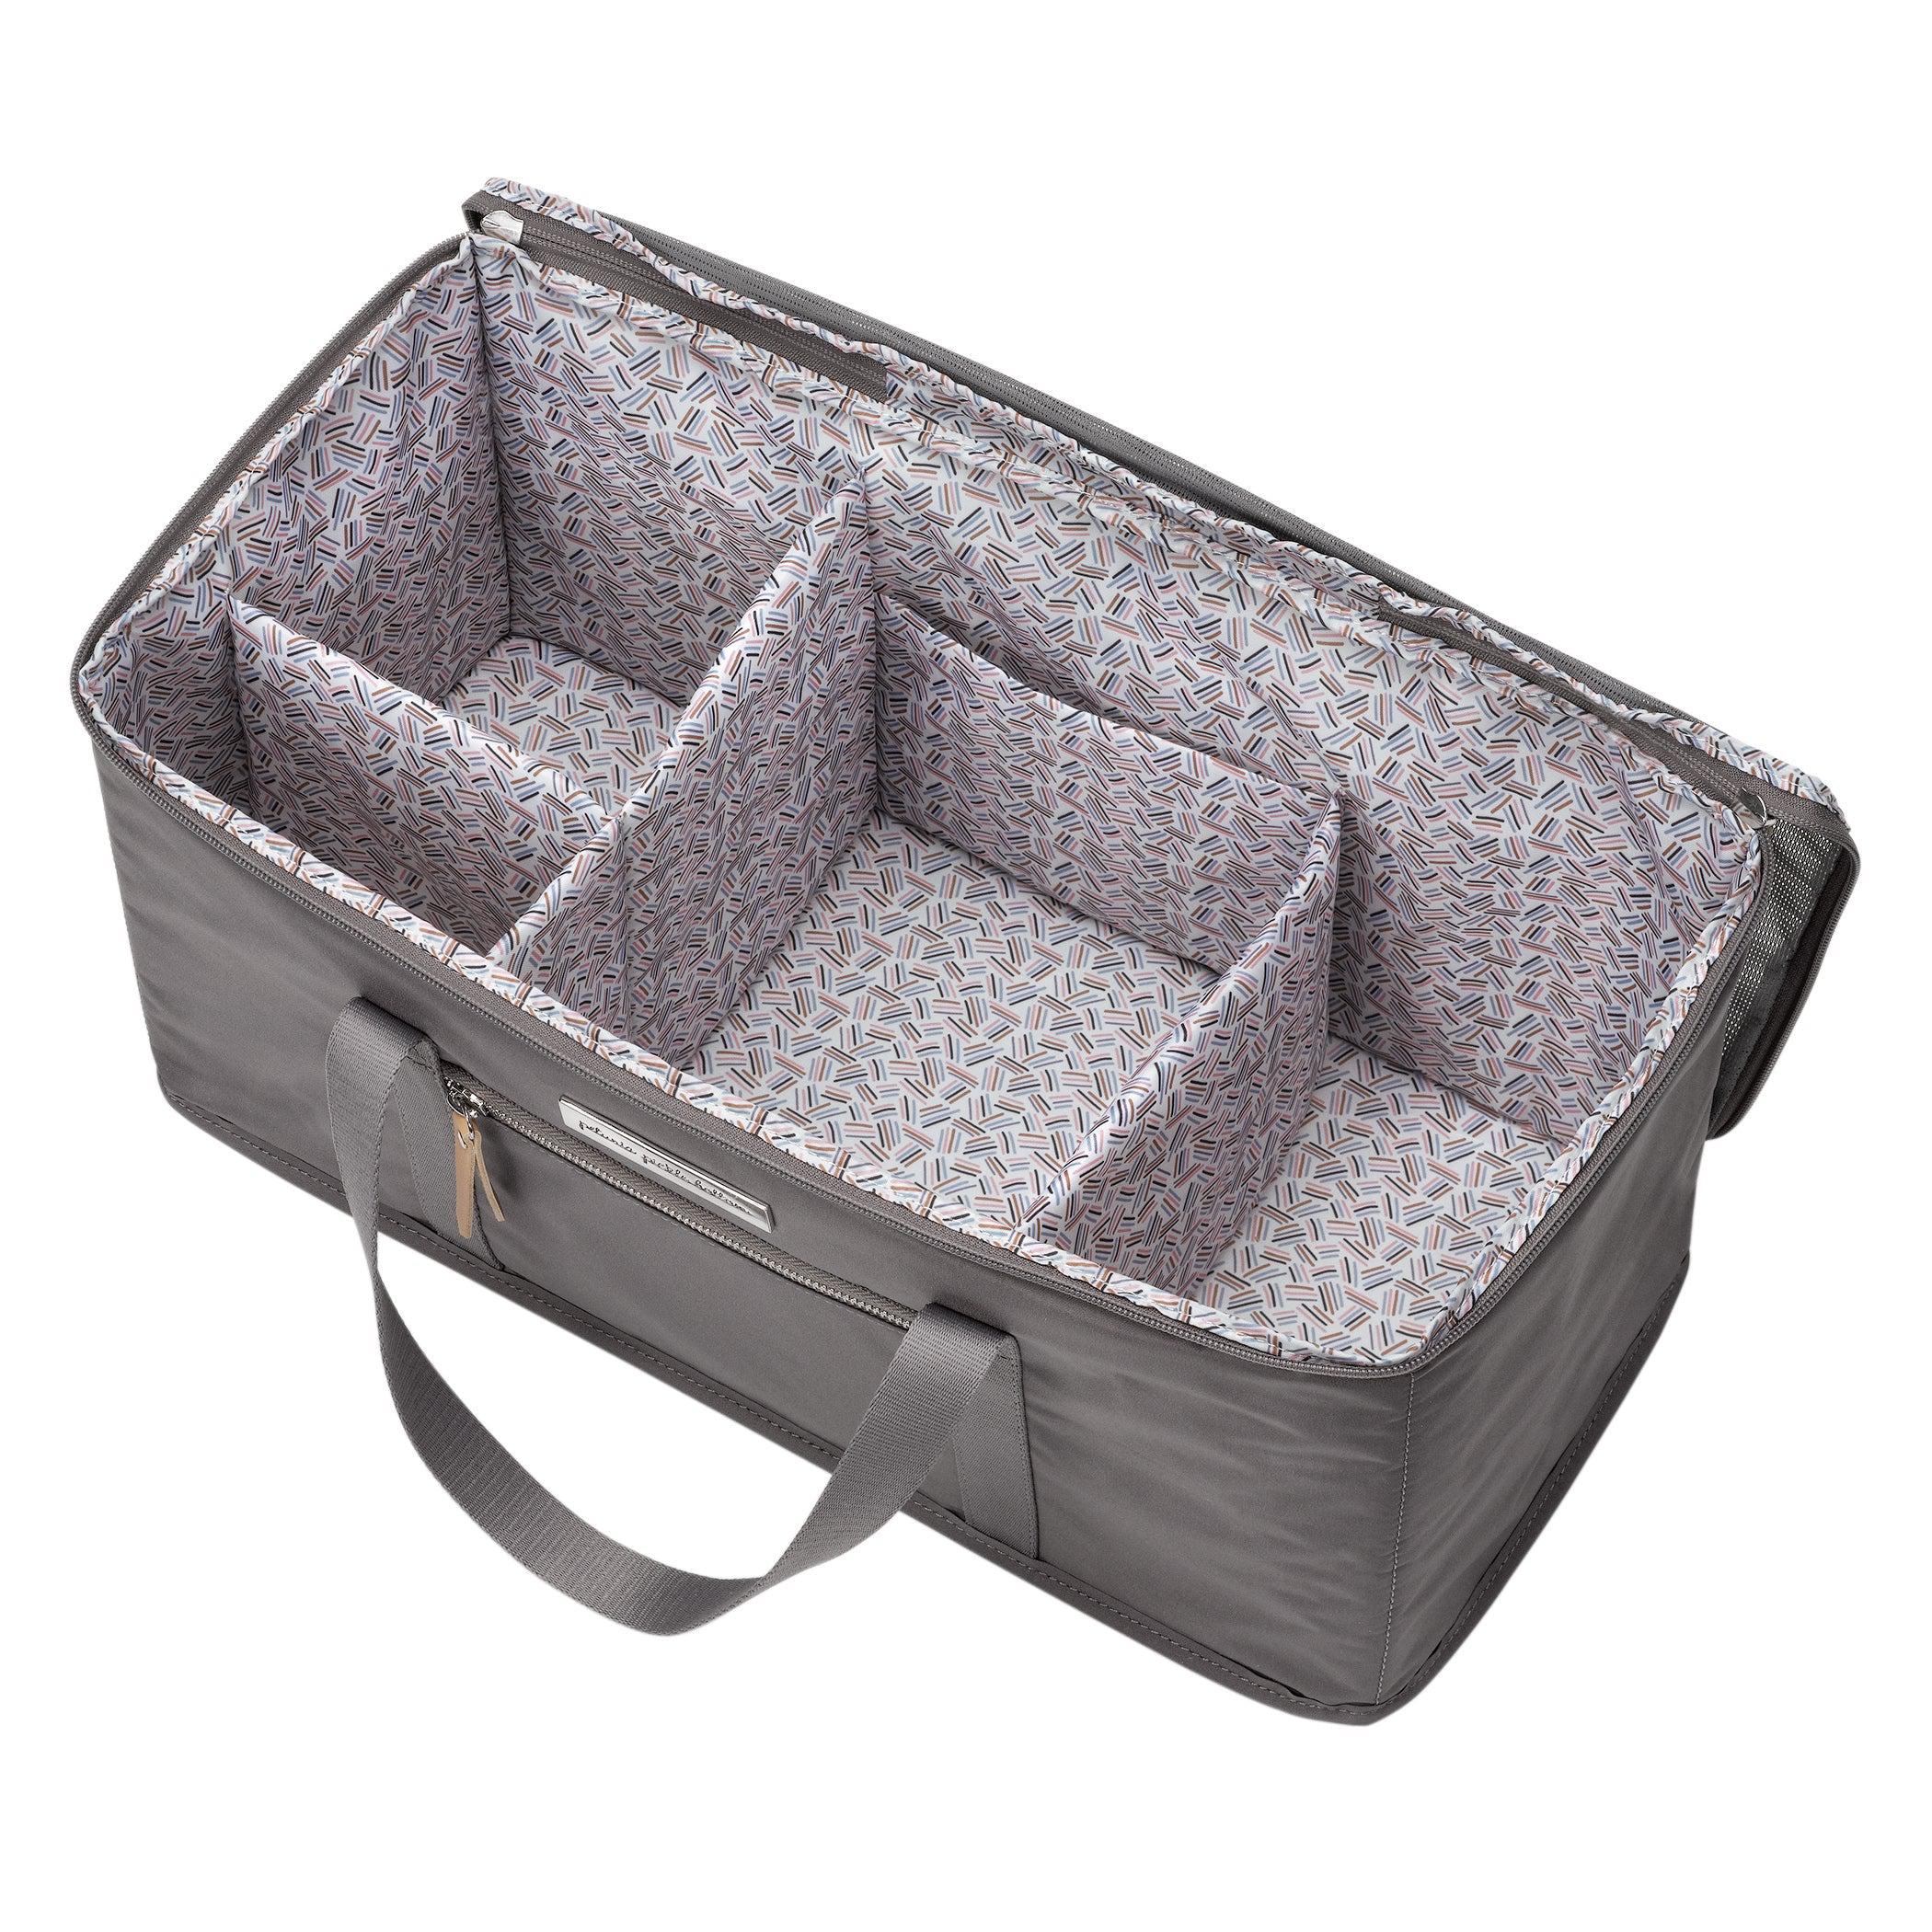 Petunia Pickle Bottom Inter-Mix Contents Caddy in Charcoal Packing Cube